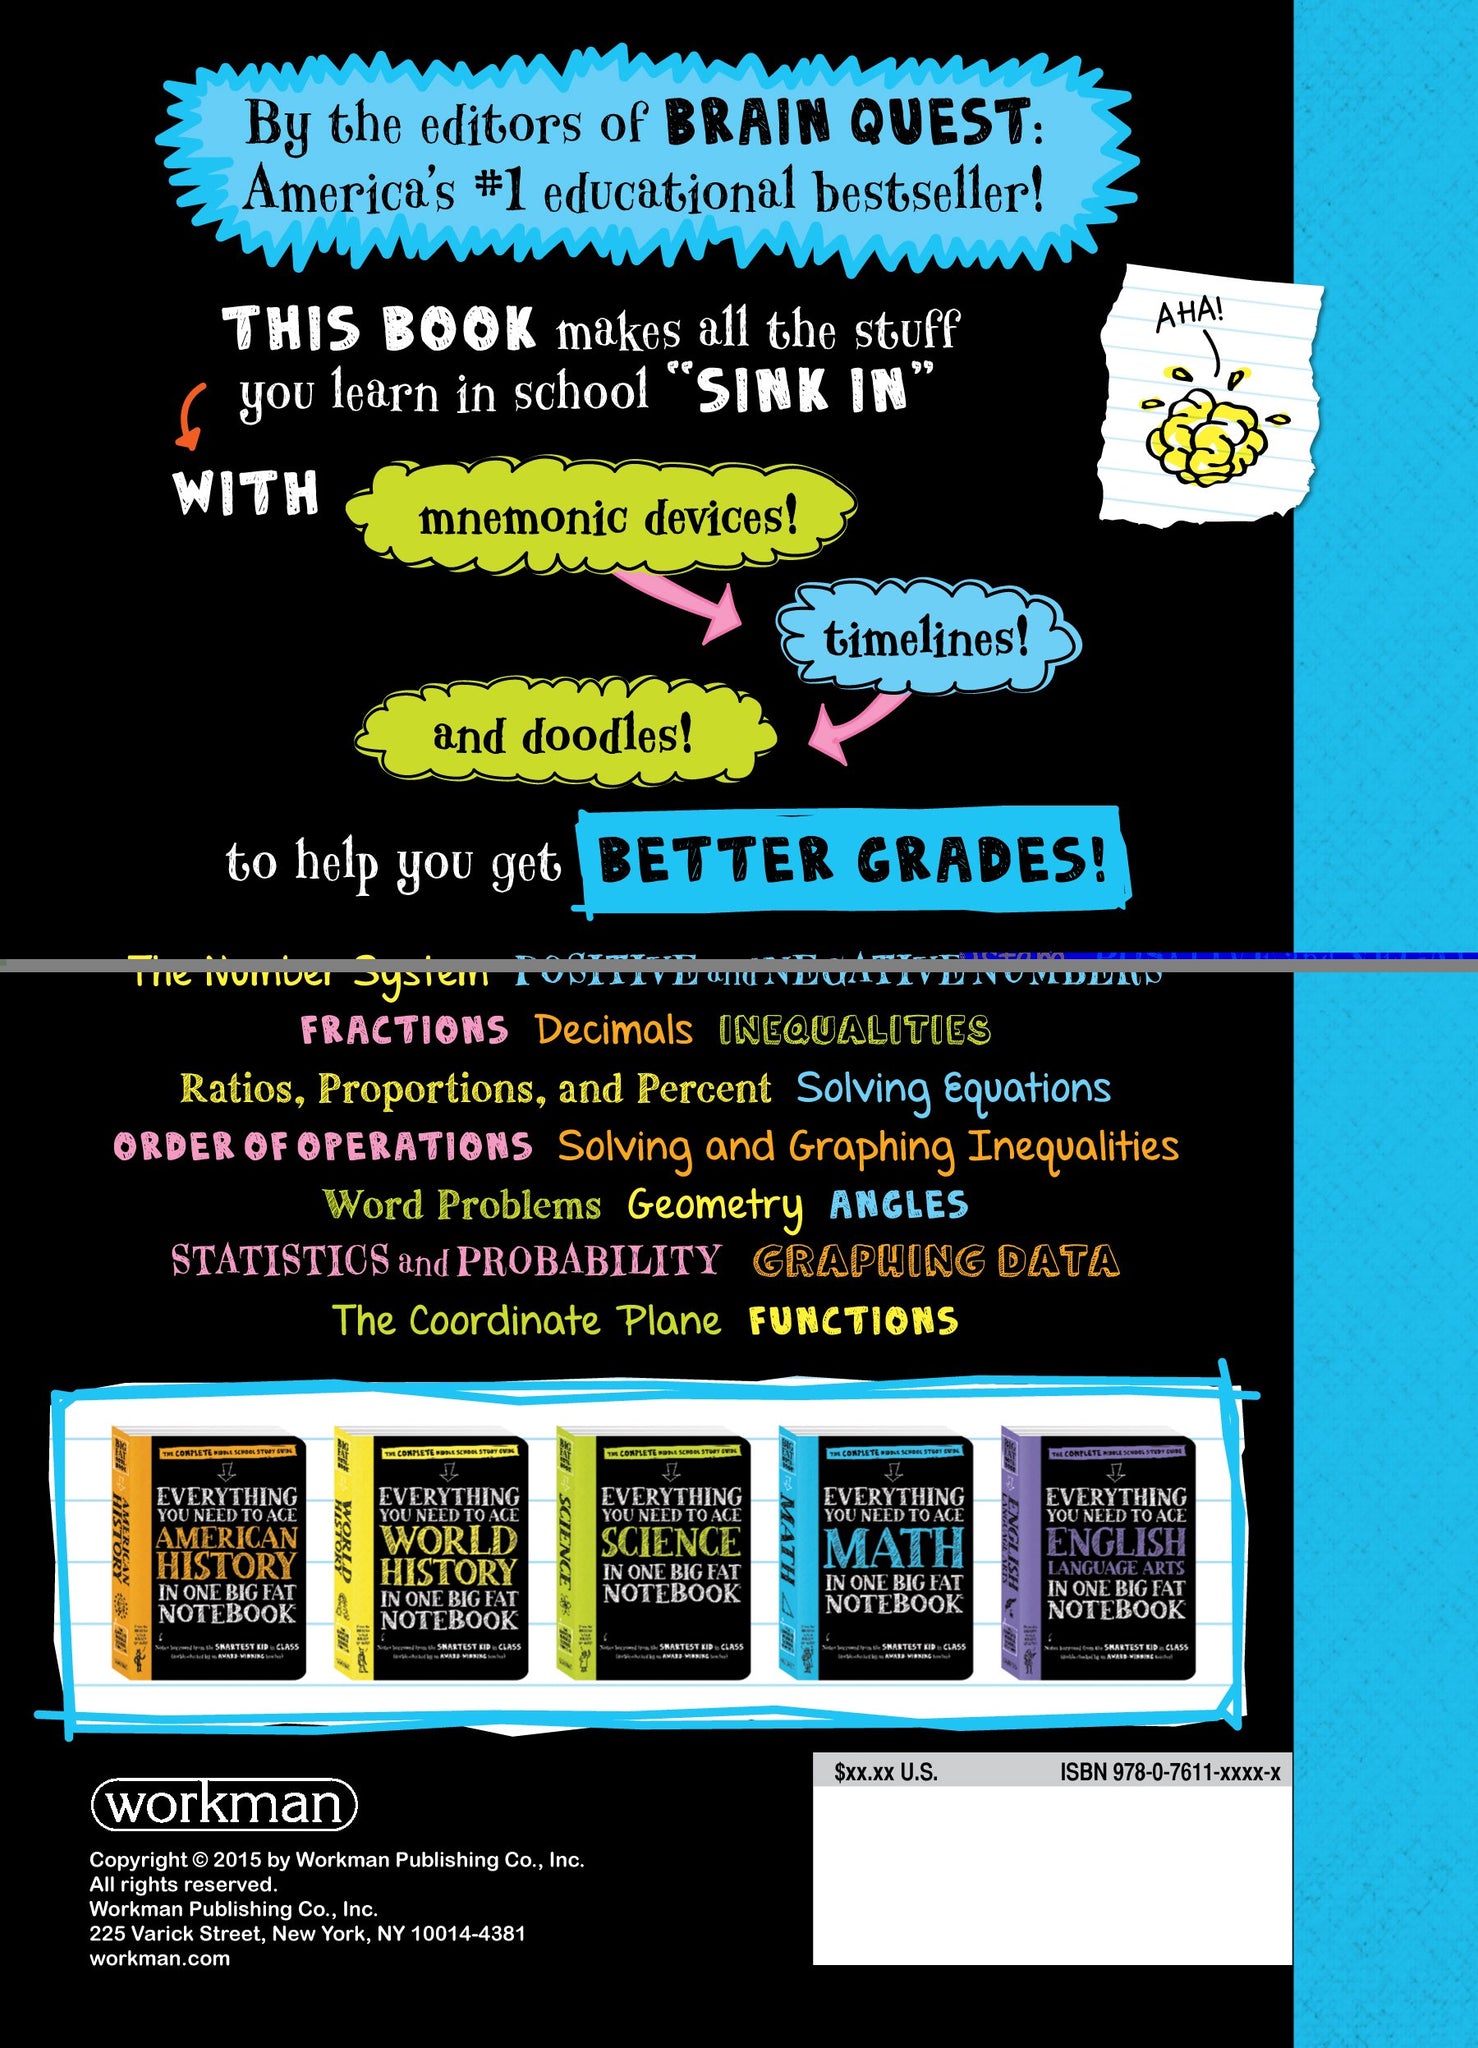 Everything You Need to Ace Math in One Big Fat Notebook - Paperback 